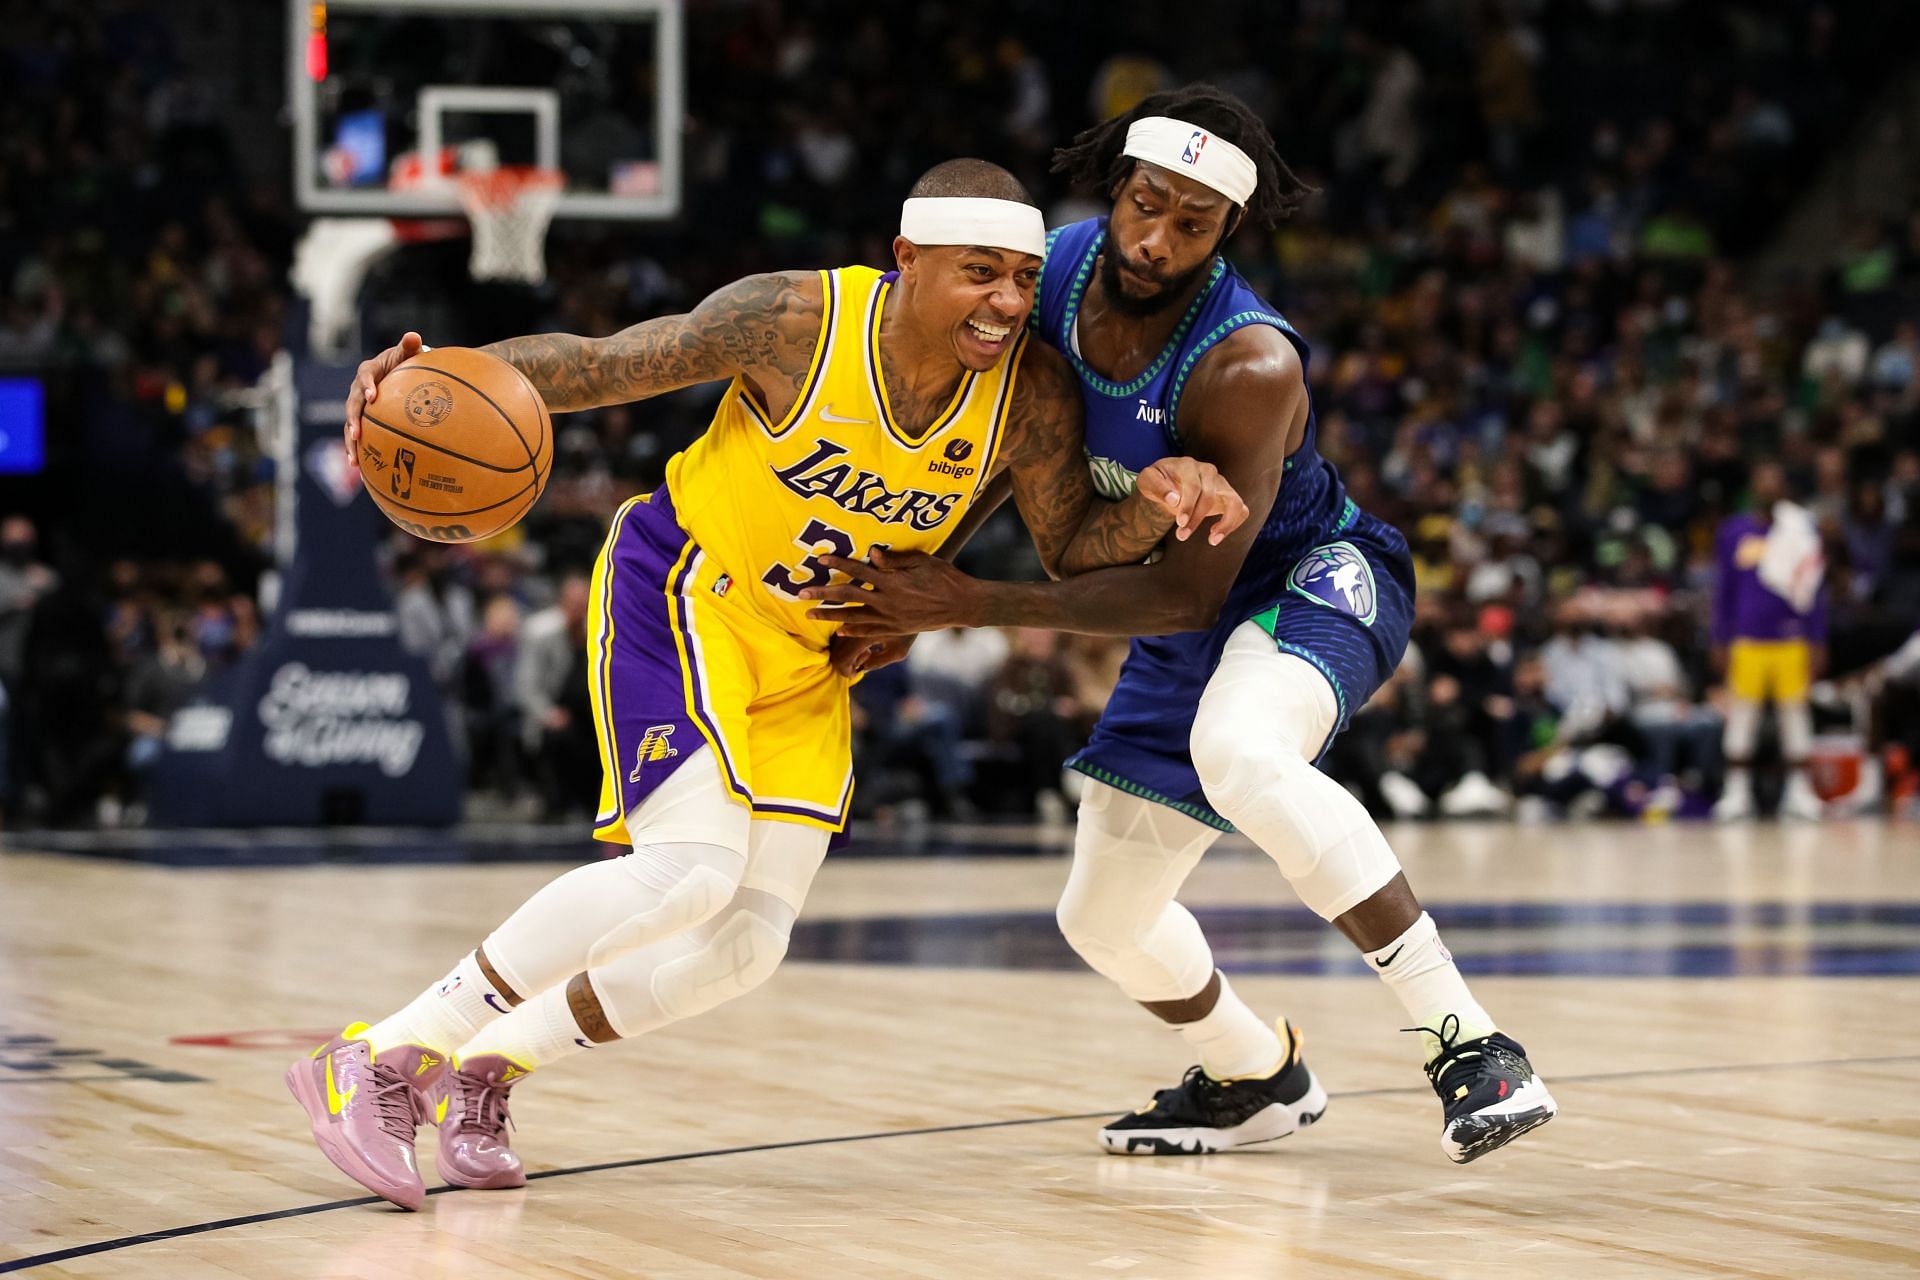 Isaiah Thomas #31 of the LA Lakers drives to the basket while Patrick Beverley #22 of the Minnesota Timberwolves defends